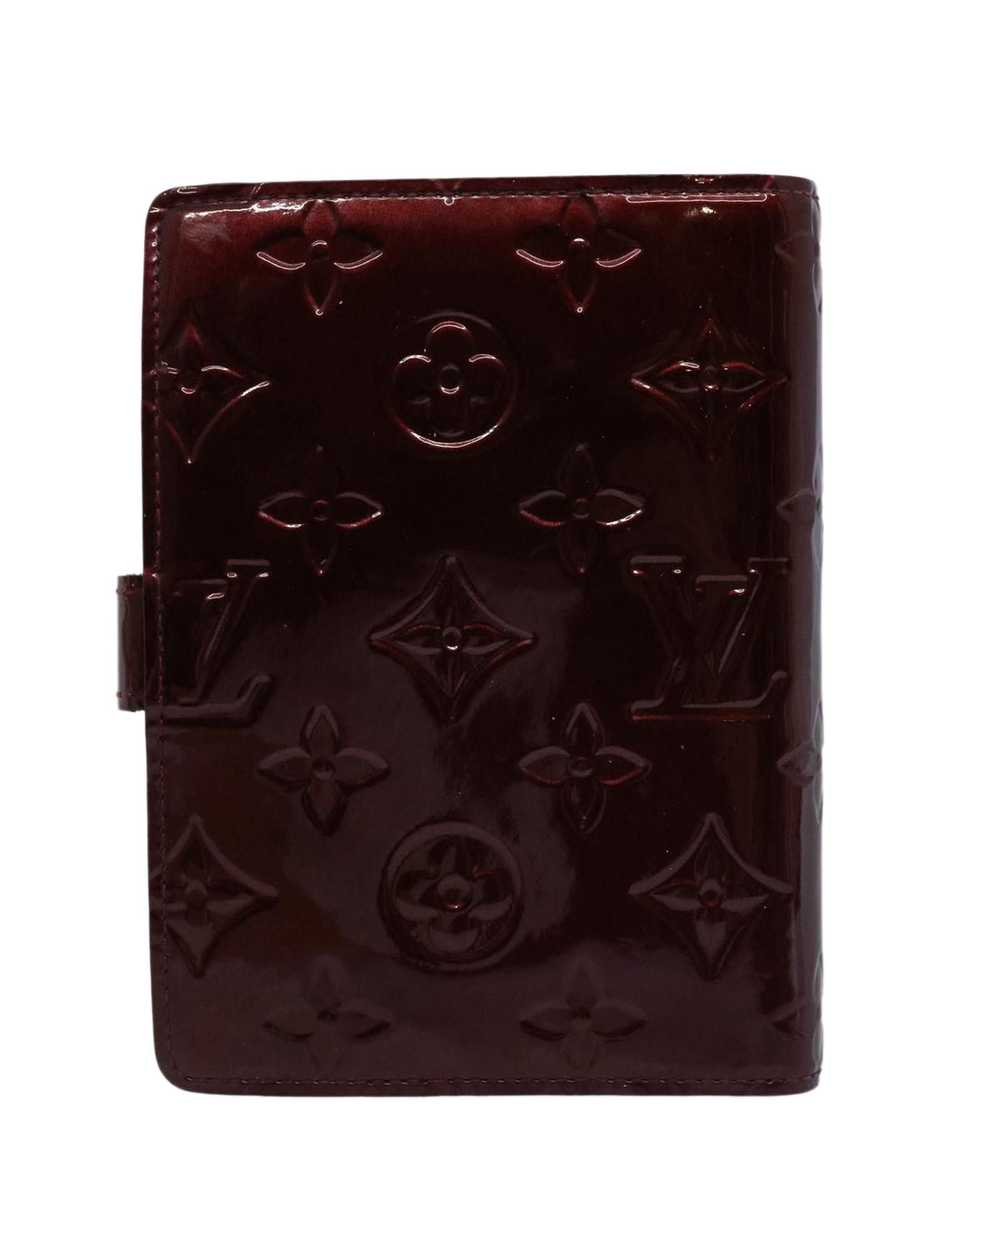 Louis Vuitton Burgundy Patent Leather Diary Cover - image 3